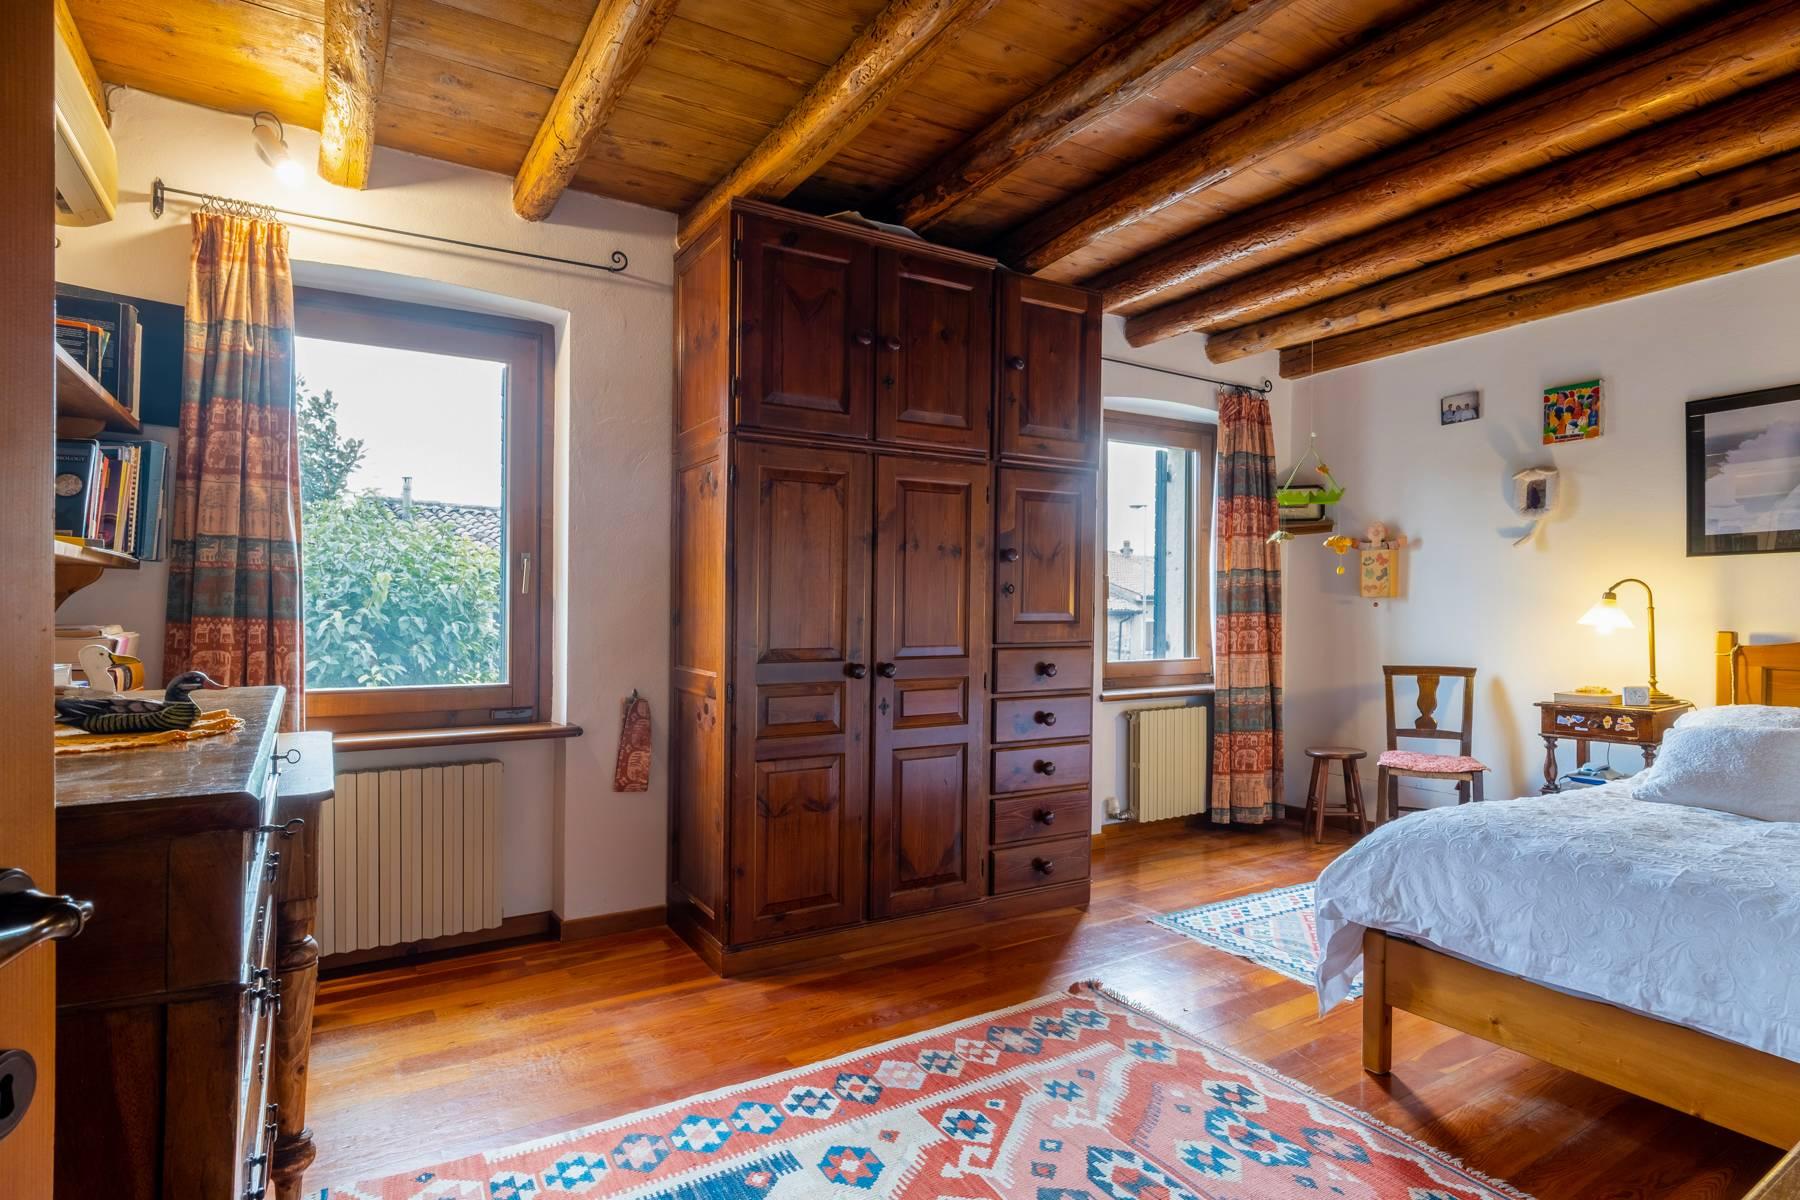 Stunning farmhouse surrounded by vineyards in the Valpolicella area - 15